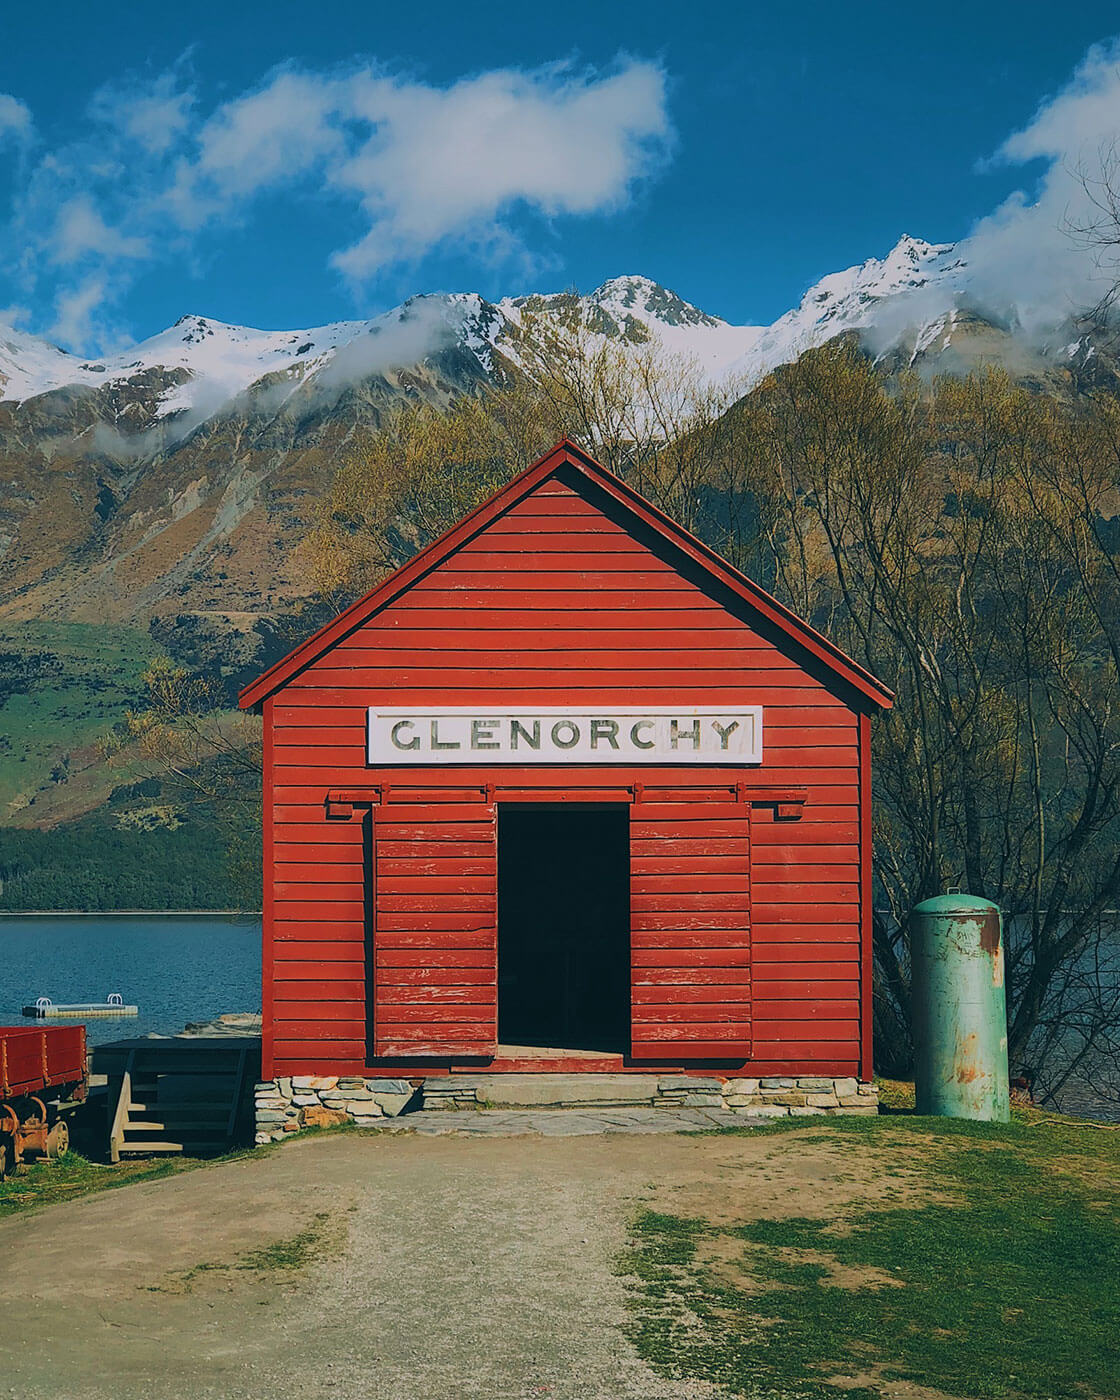 Glenorchy - 10-Day New Zealand South Island Road Trip Itinerary